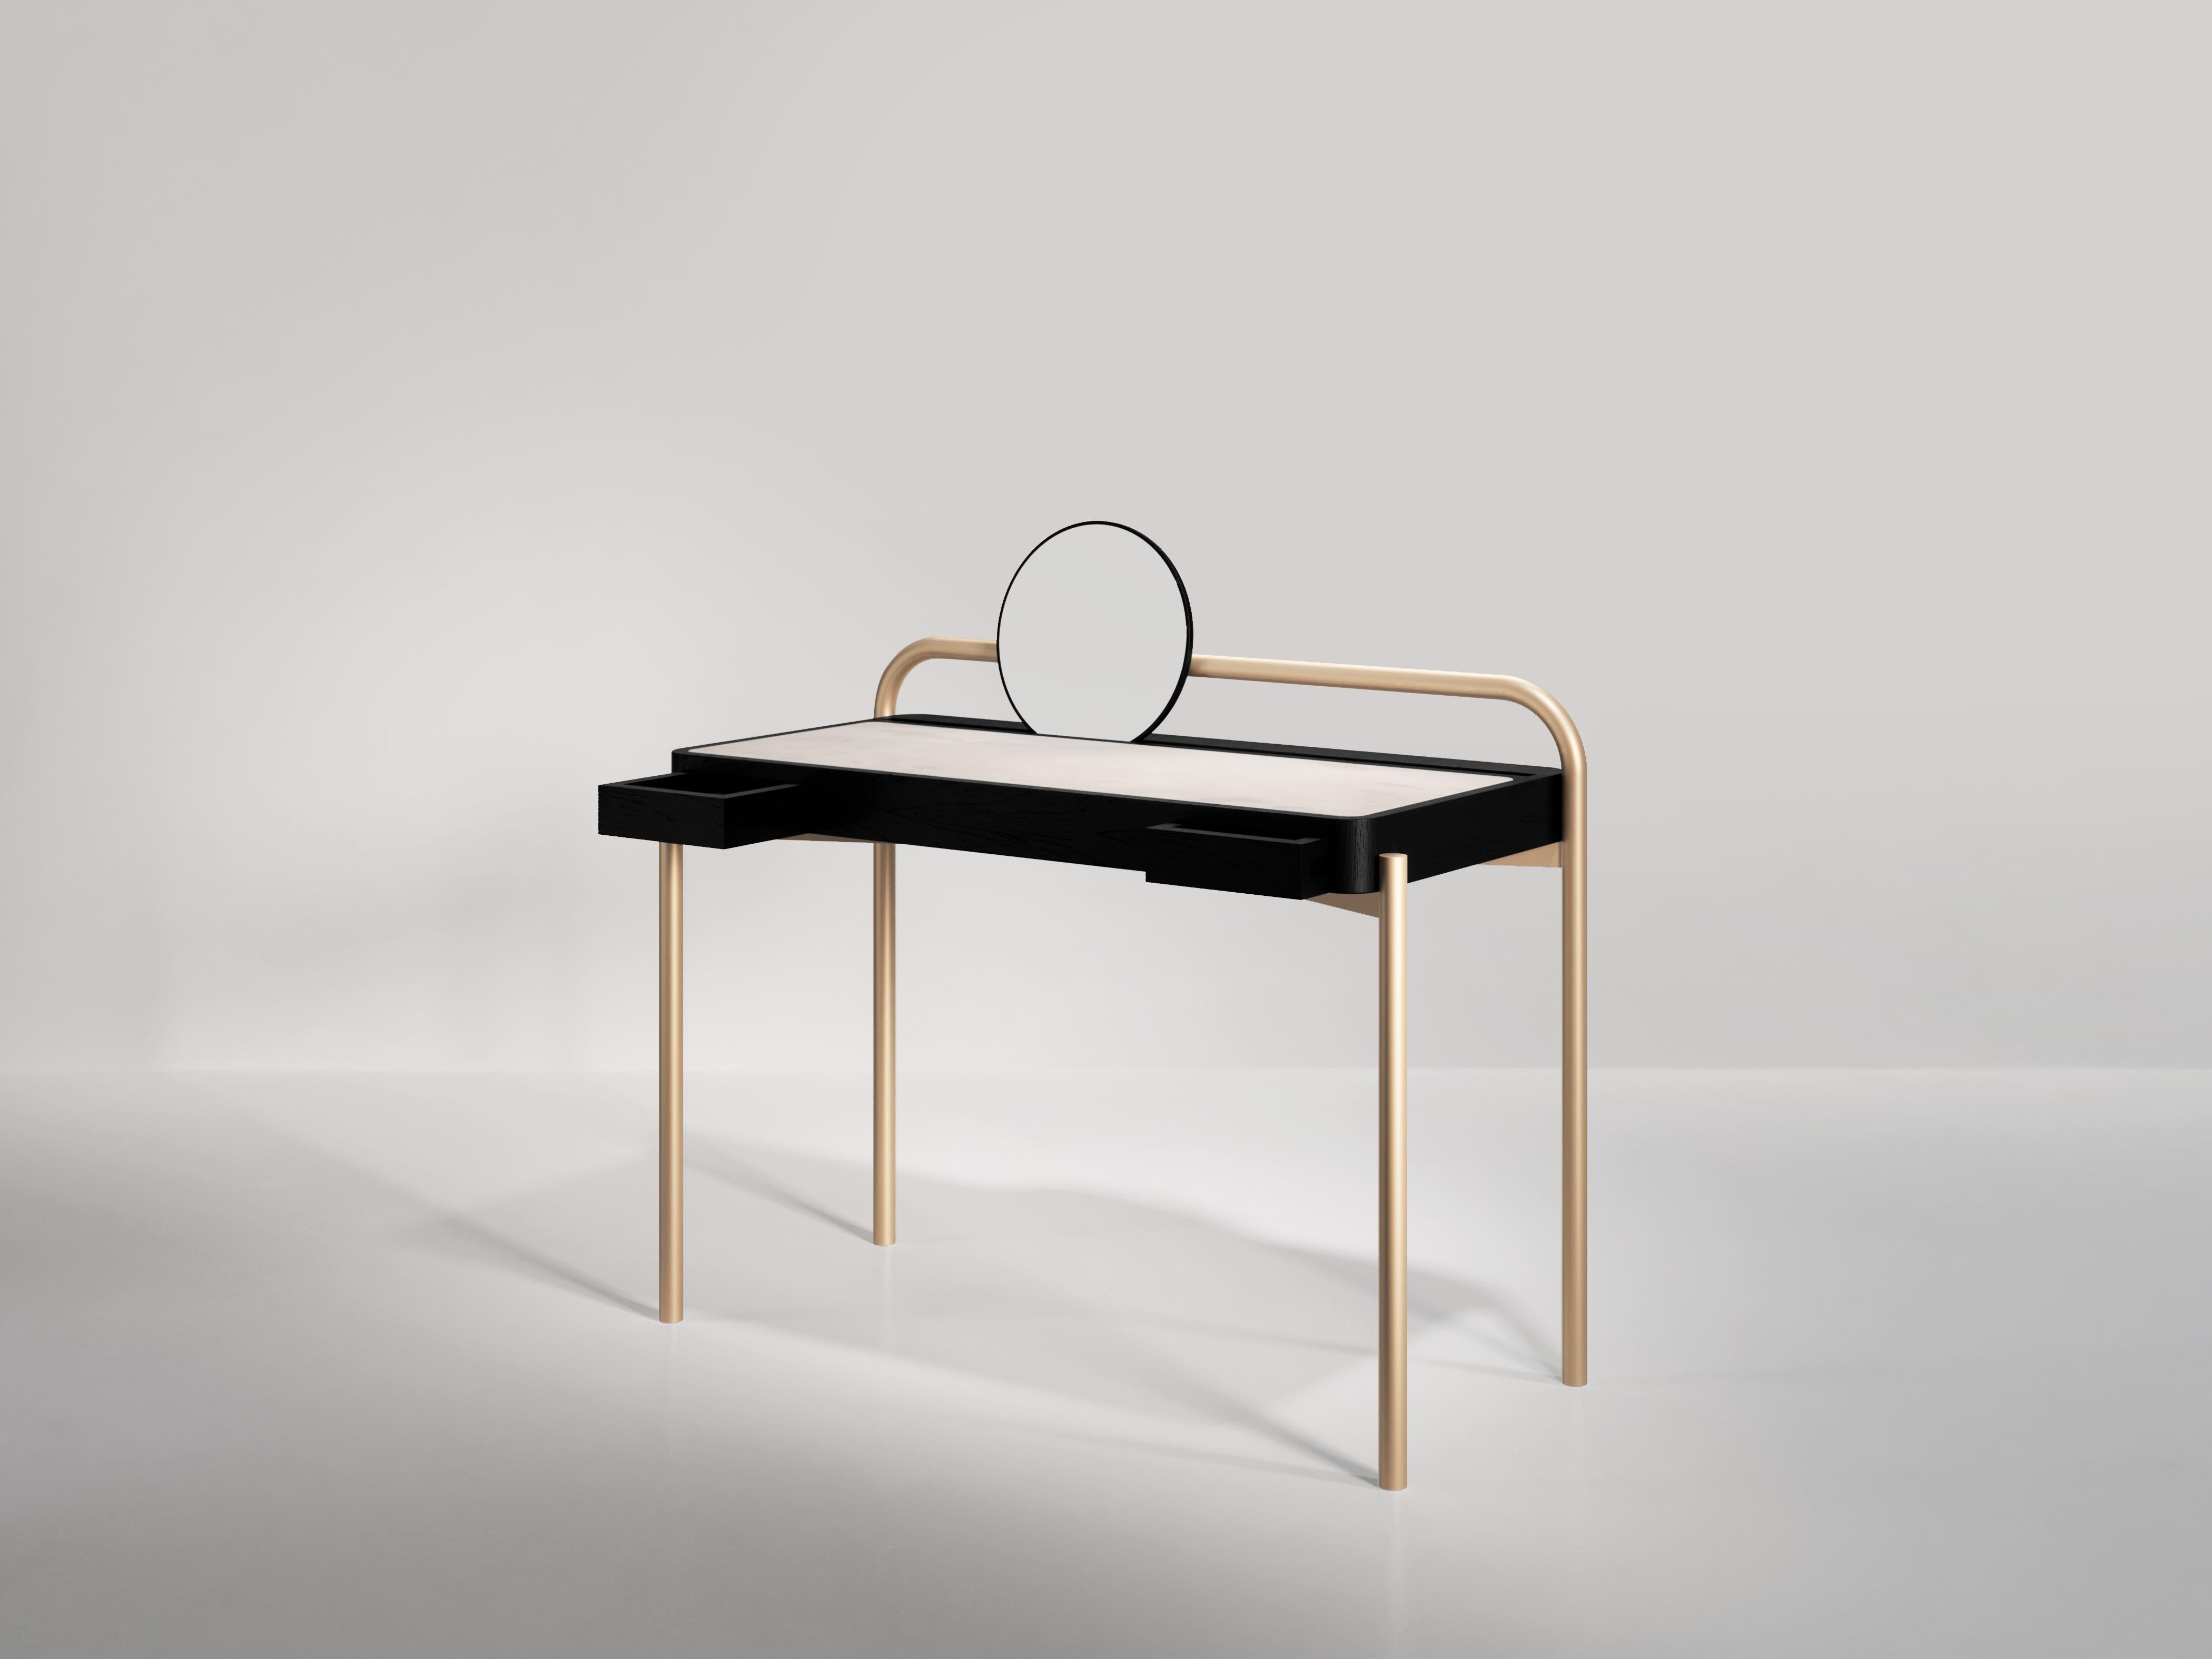 Writing desk by day and vanity table by night; roll desk 02 is a minimal piece with four metal legs supporting a solid wooden top. The top is upholstered in suede or leather for easy and comfortable use. The back legs are sculpted from one